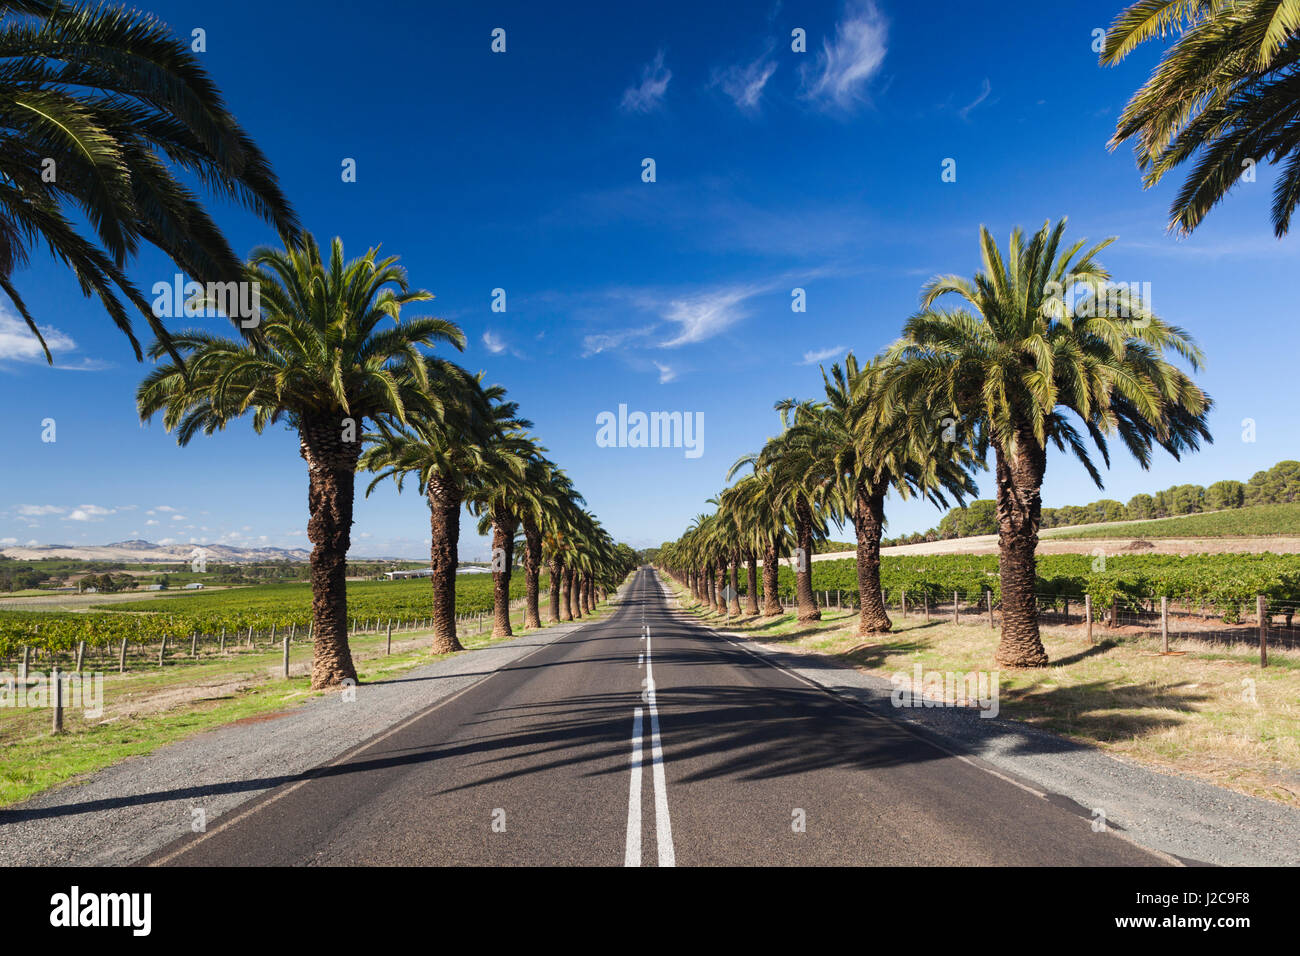 Australia, Barossa Valley, Seppeltsfield, country road with palm trees Stock Photo